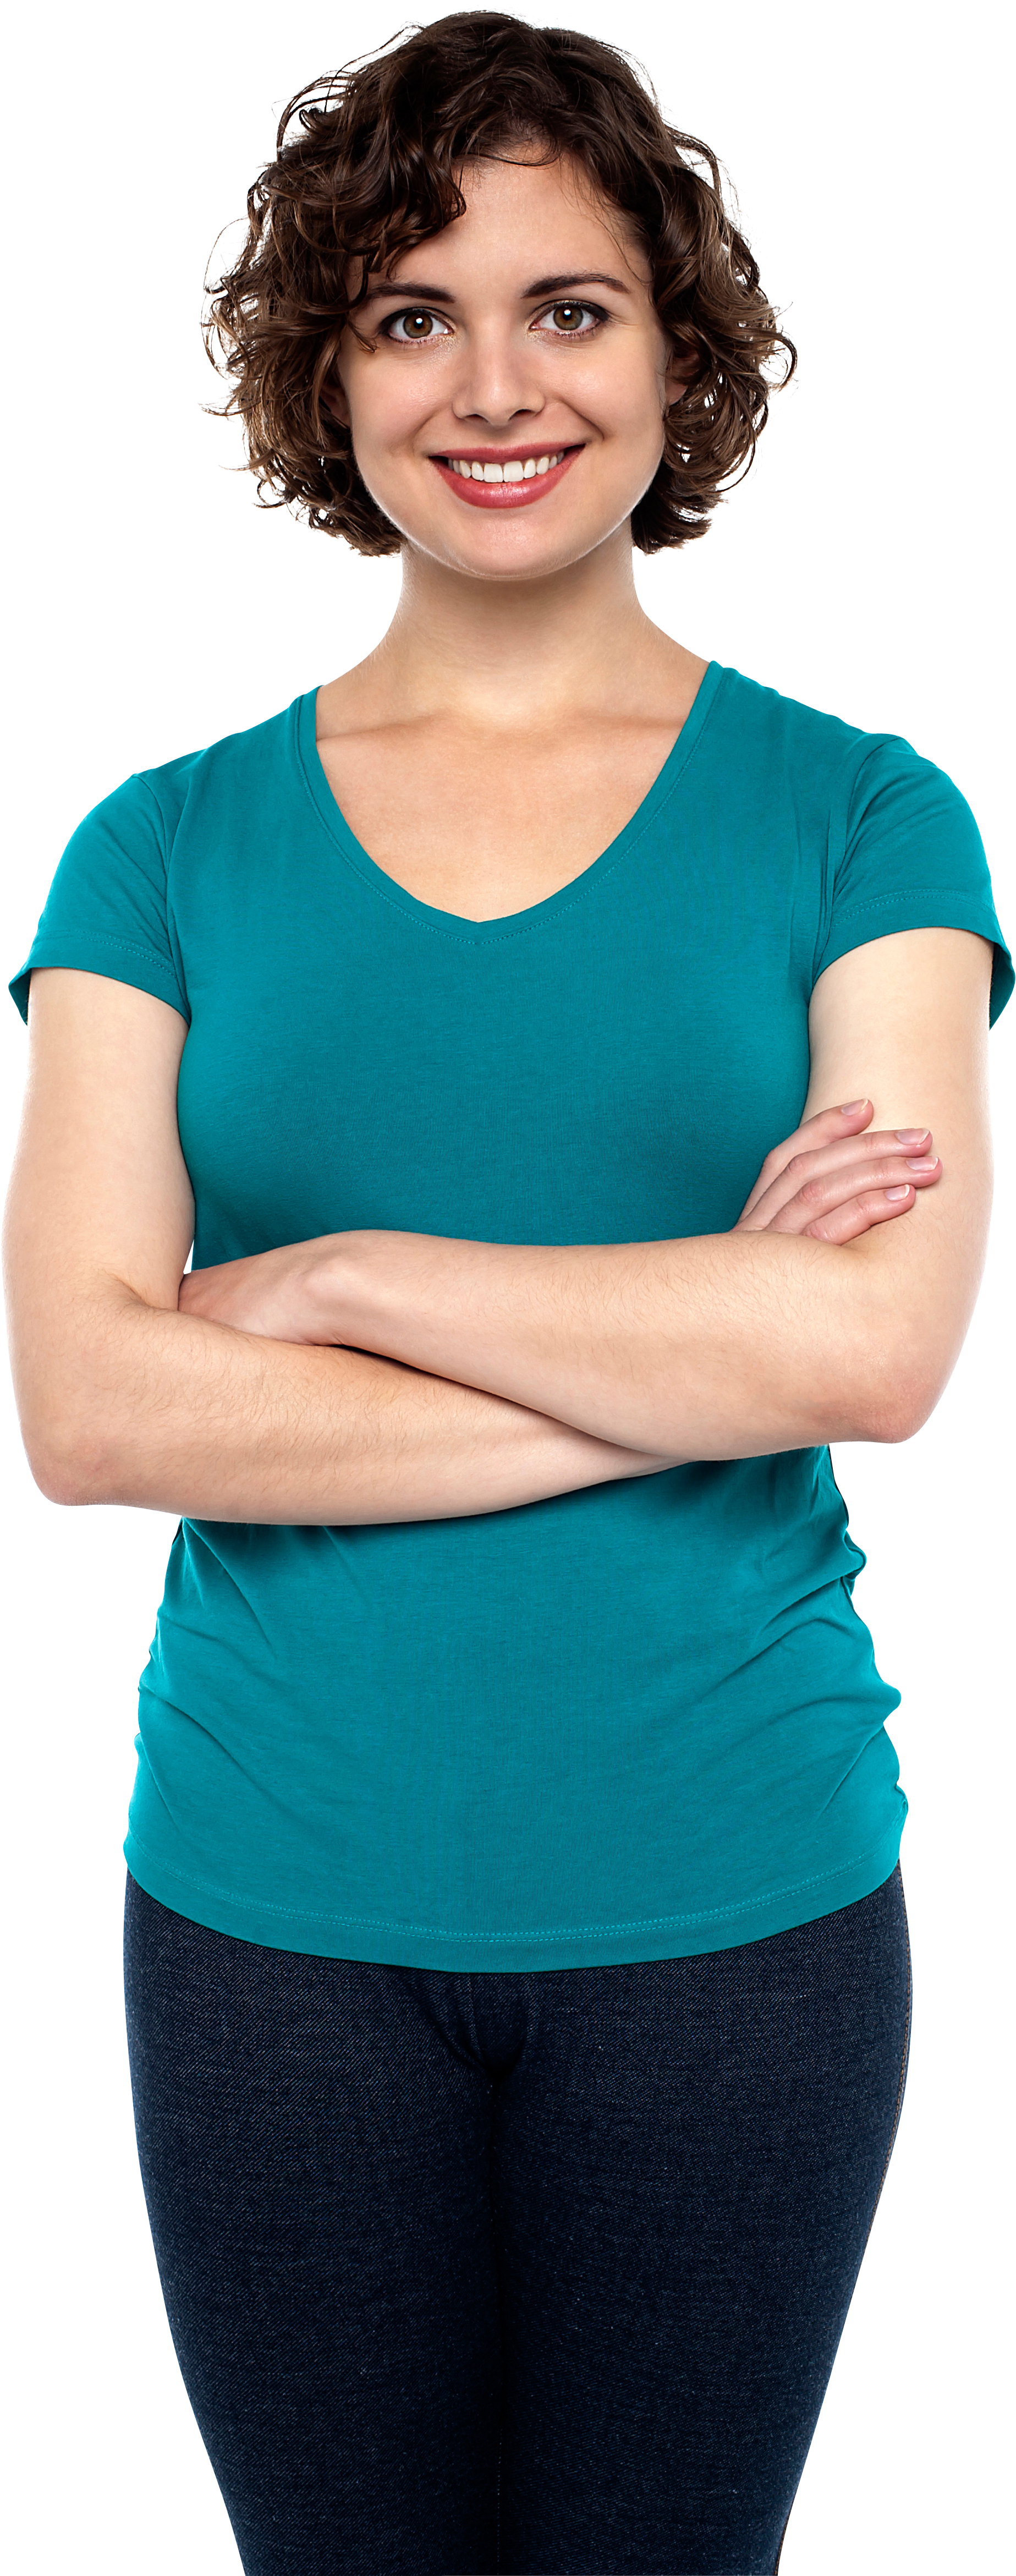 Standing Women Png Background Photo - Woman Standing Png, Transparent Png